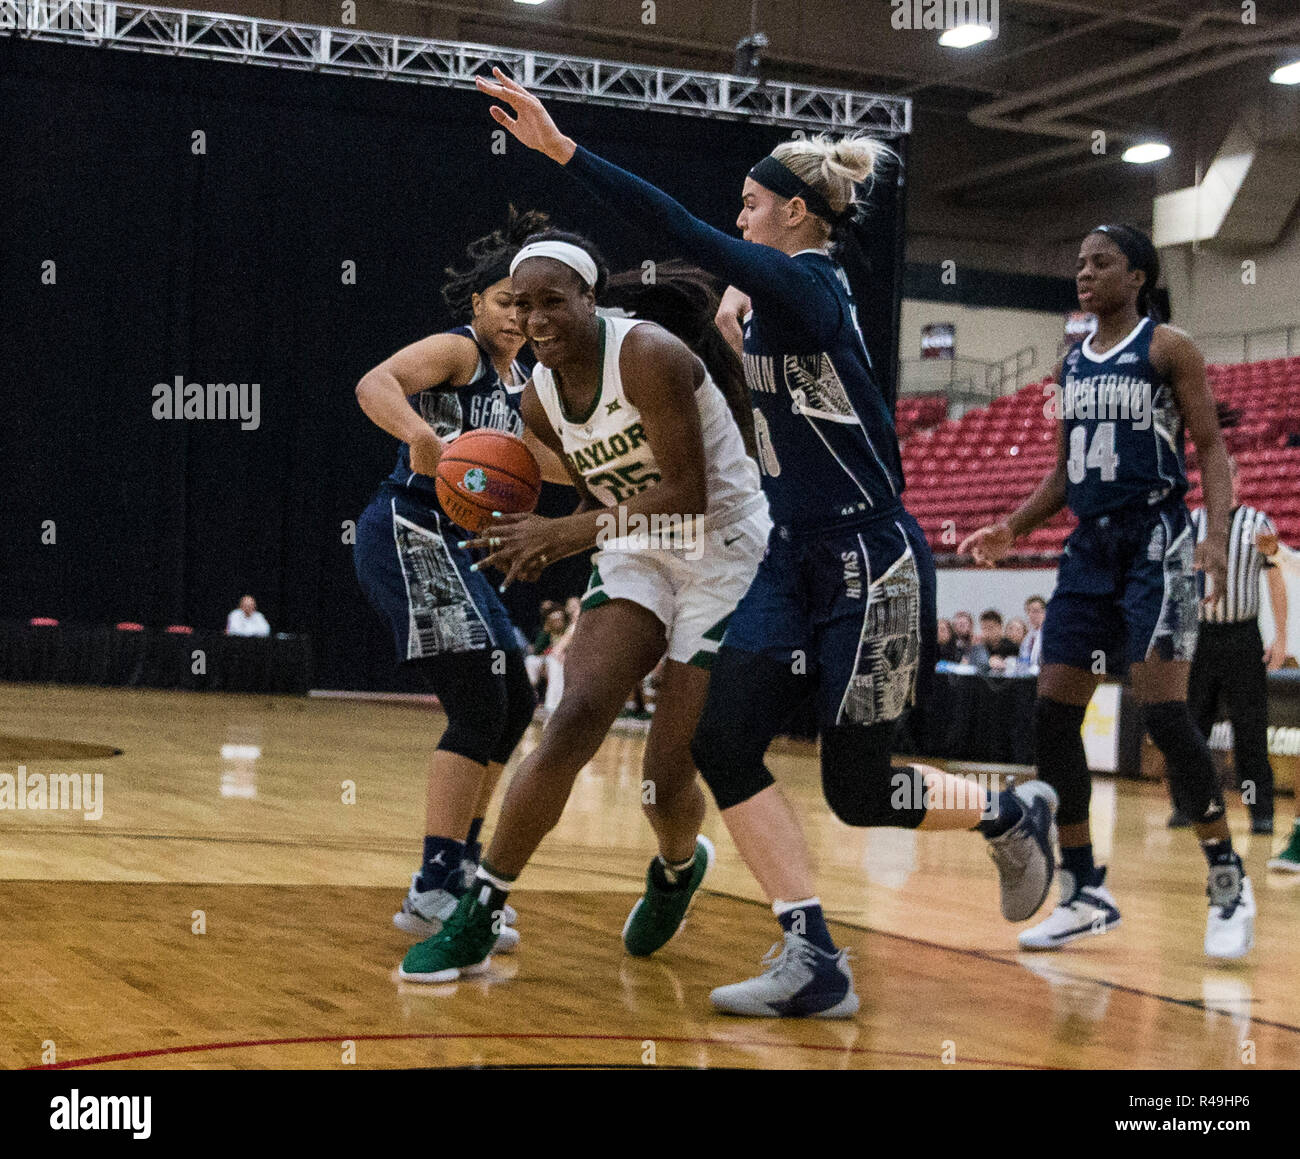 Nov 24 2018 Las Vegas, NV U.S.A. Baylor center Queen Egbo (25) drives to the hoop during the NCAA Women's Basketball Thanksgiving Shootout between Baylor Bears and the Georgetown Hoyas 67-46 win at South Point Arena Las Vegas, NV. Thurman James/CSM Stock Photo